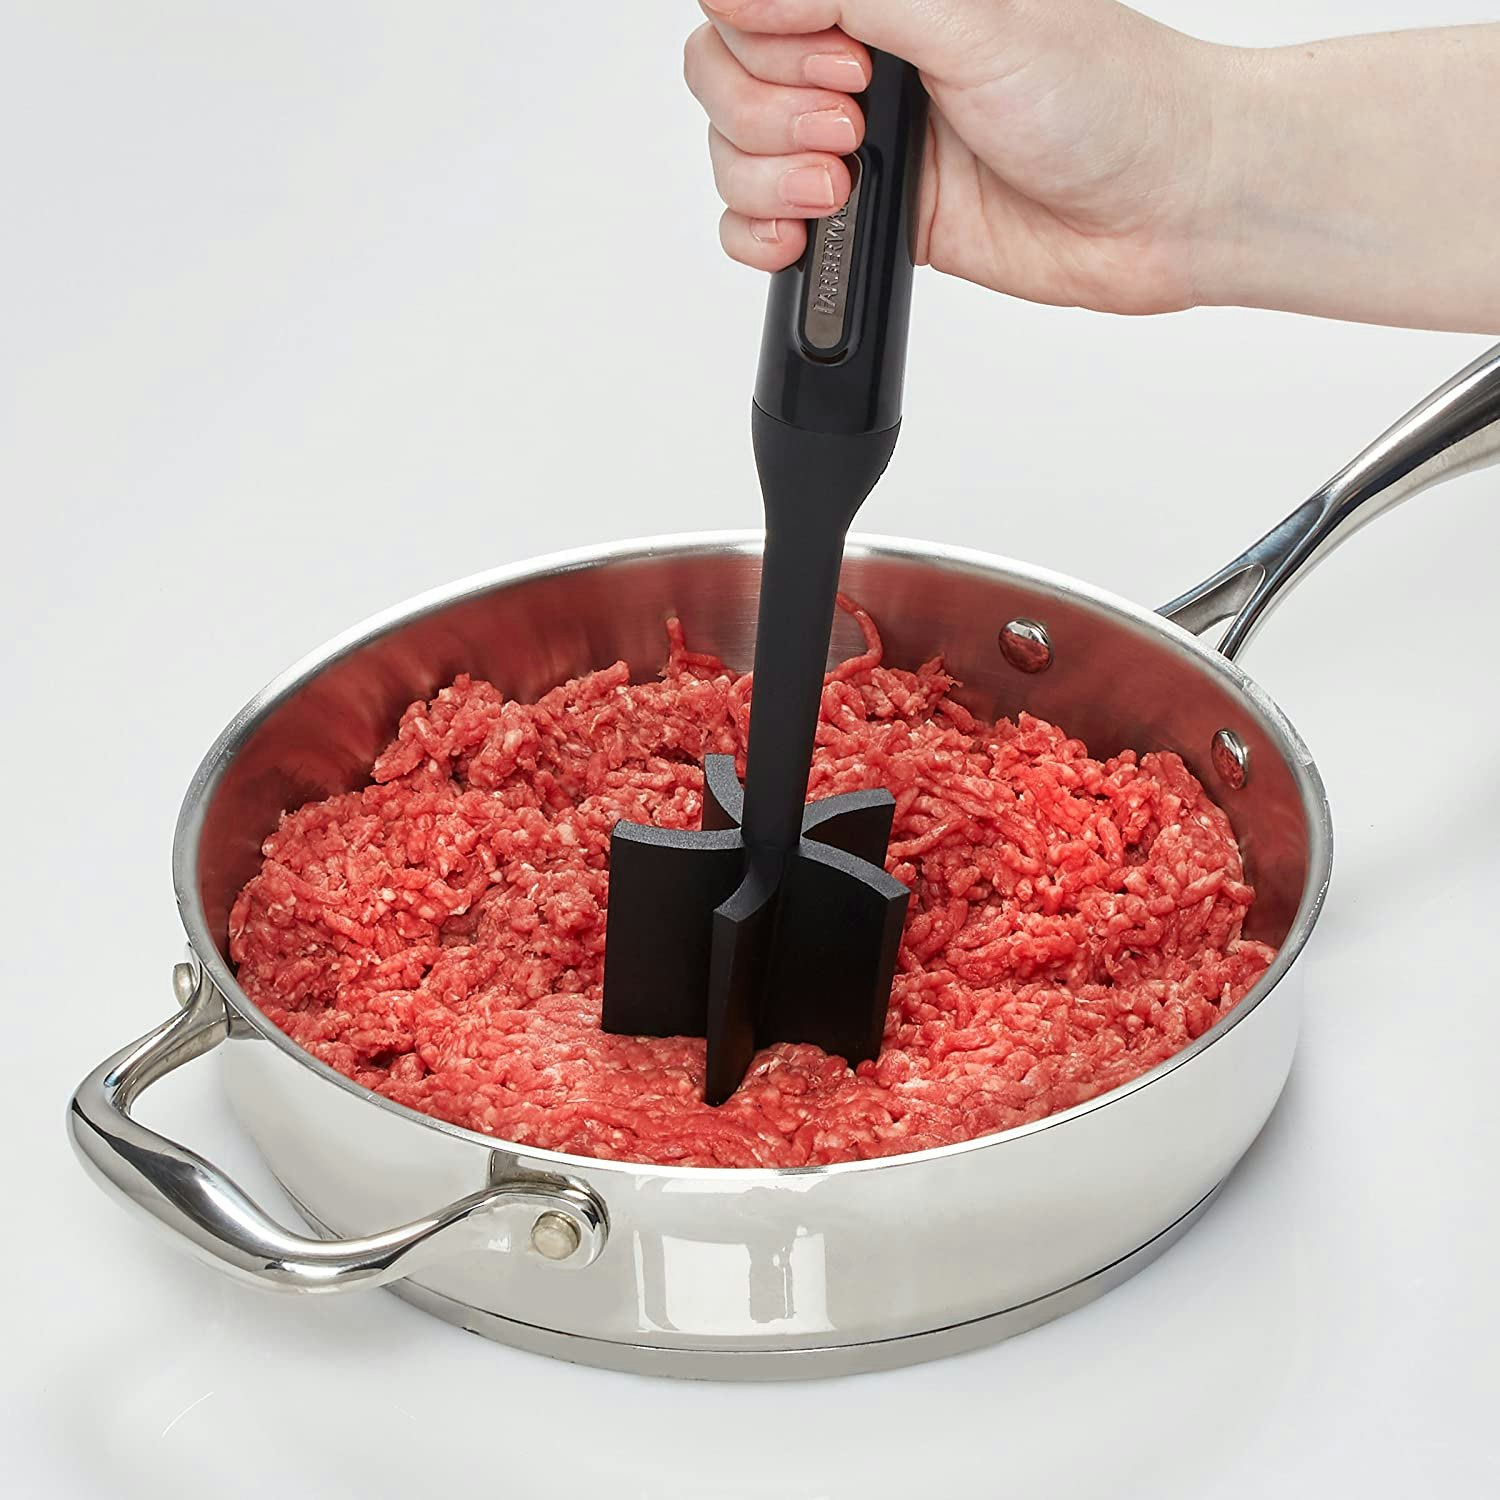 Meat Chopper, Exquisite Multifunctional Heat Resistant plastic Meat Chopper  Tool, 5 Curve Blades Masher Non Stick Utensil, Ground Meat Masher for Hamburger  Meat,Ground Beef Turkey and More 